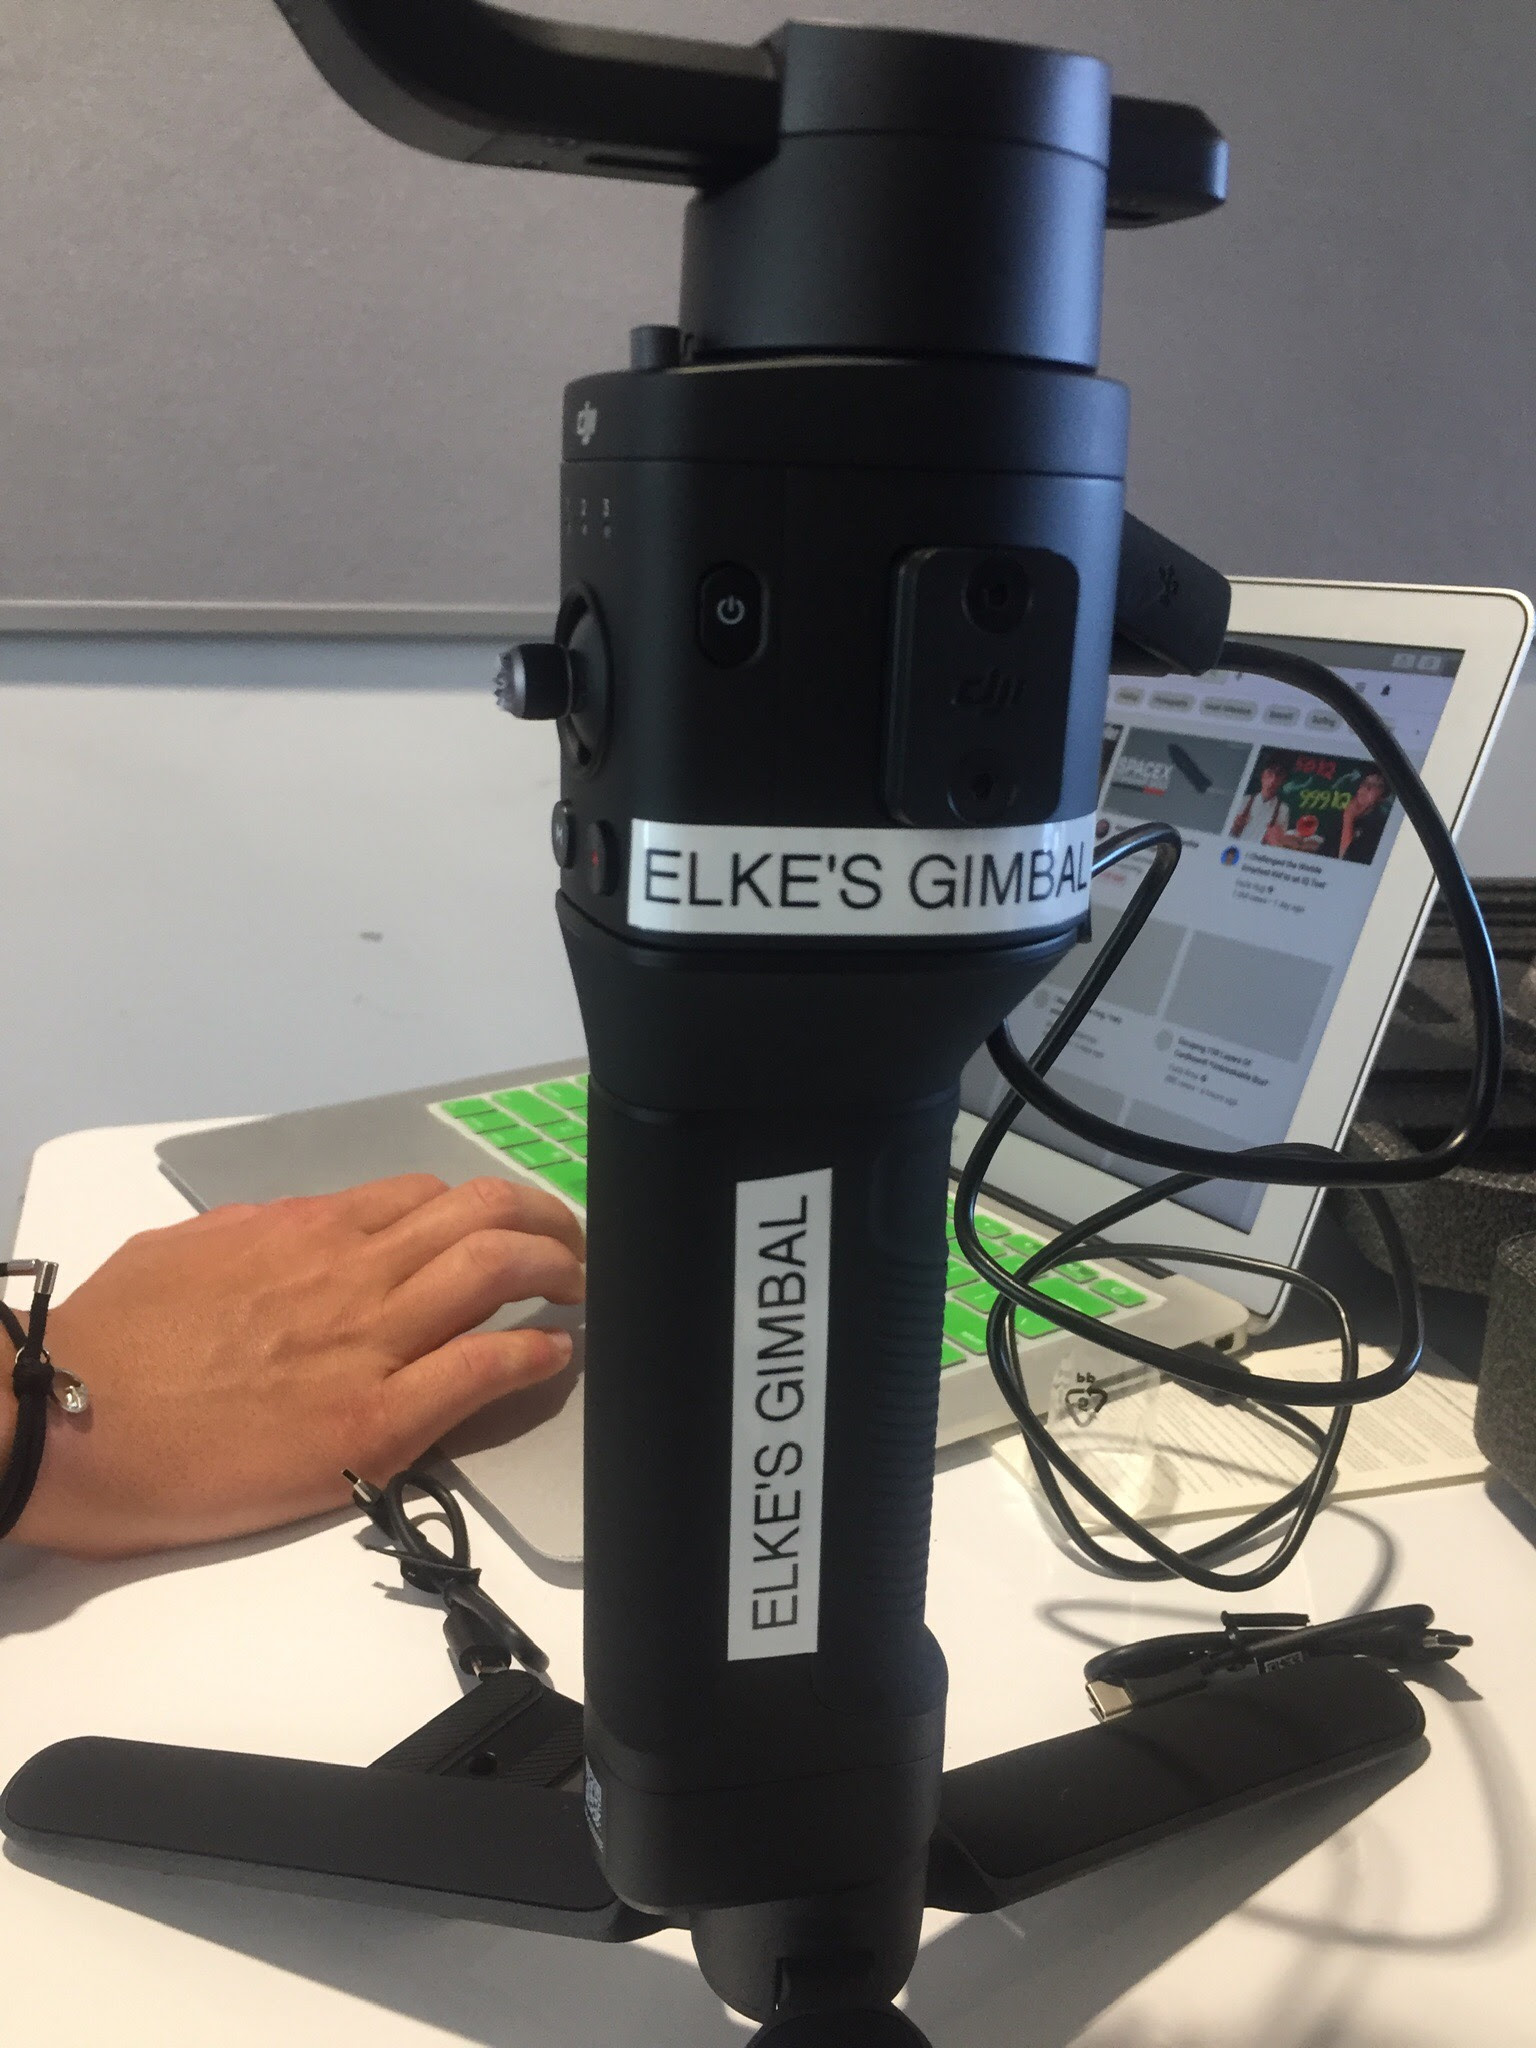 Elke's Gimbal - The BPM Student Challenge 2020 school prize money went towards this excelent piece of kit for Wakatipu High School